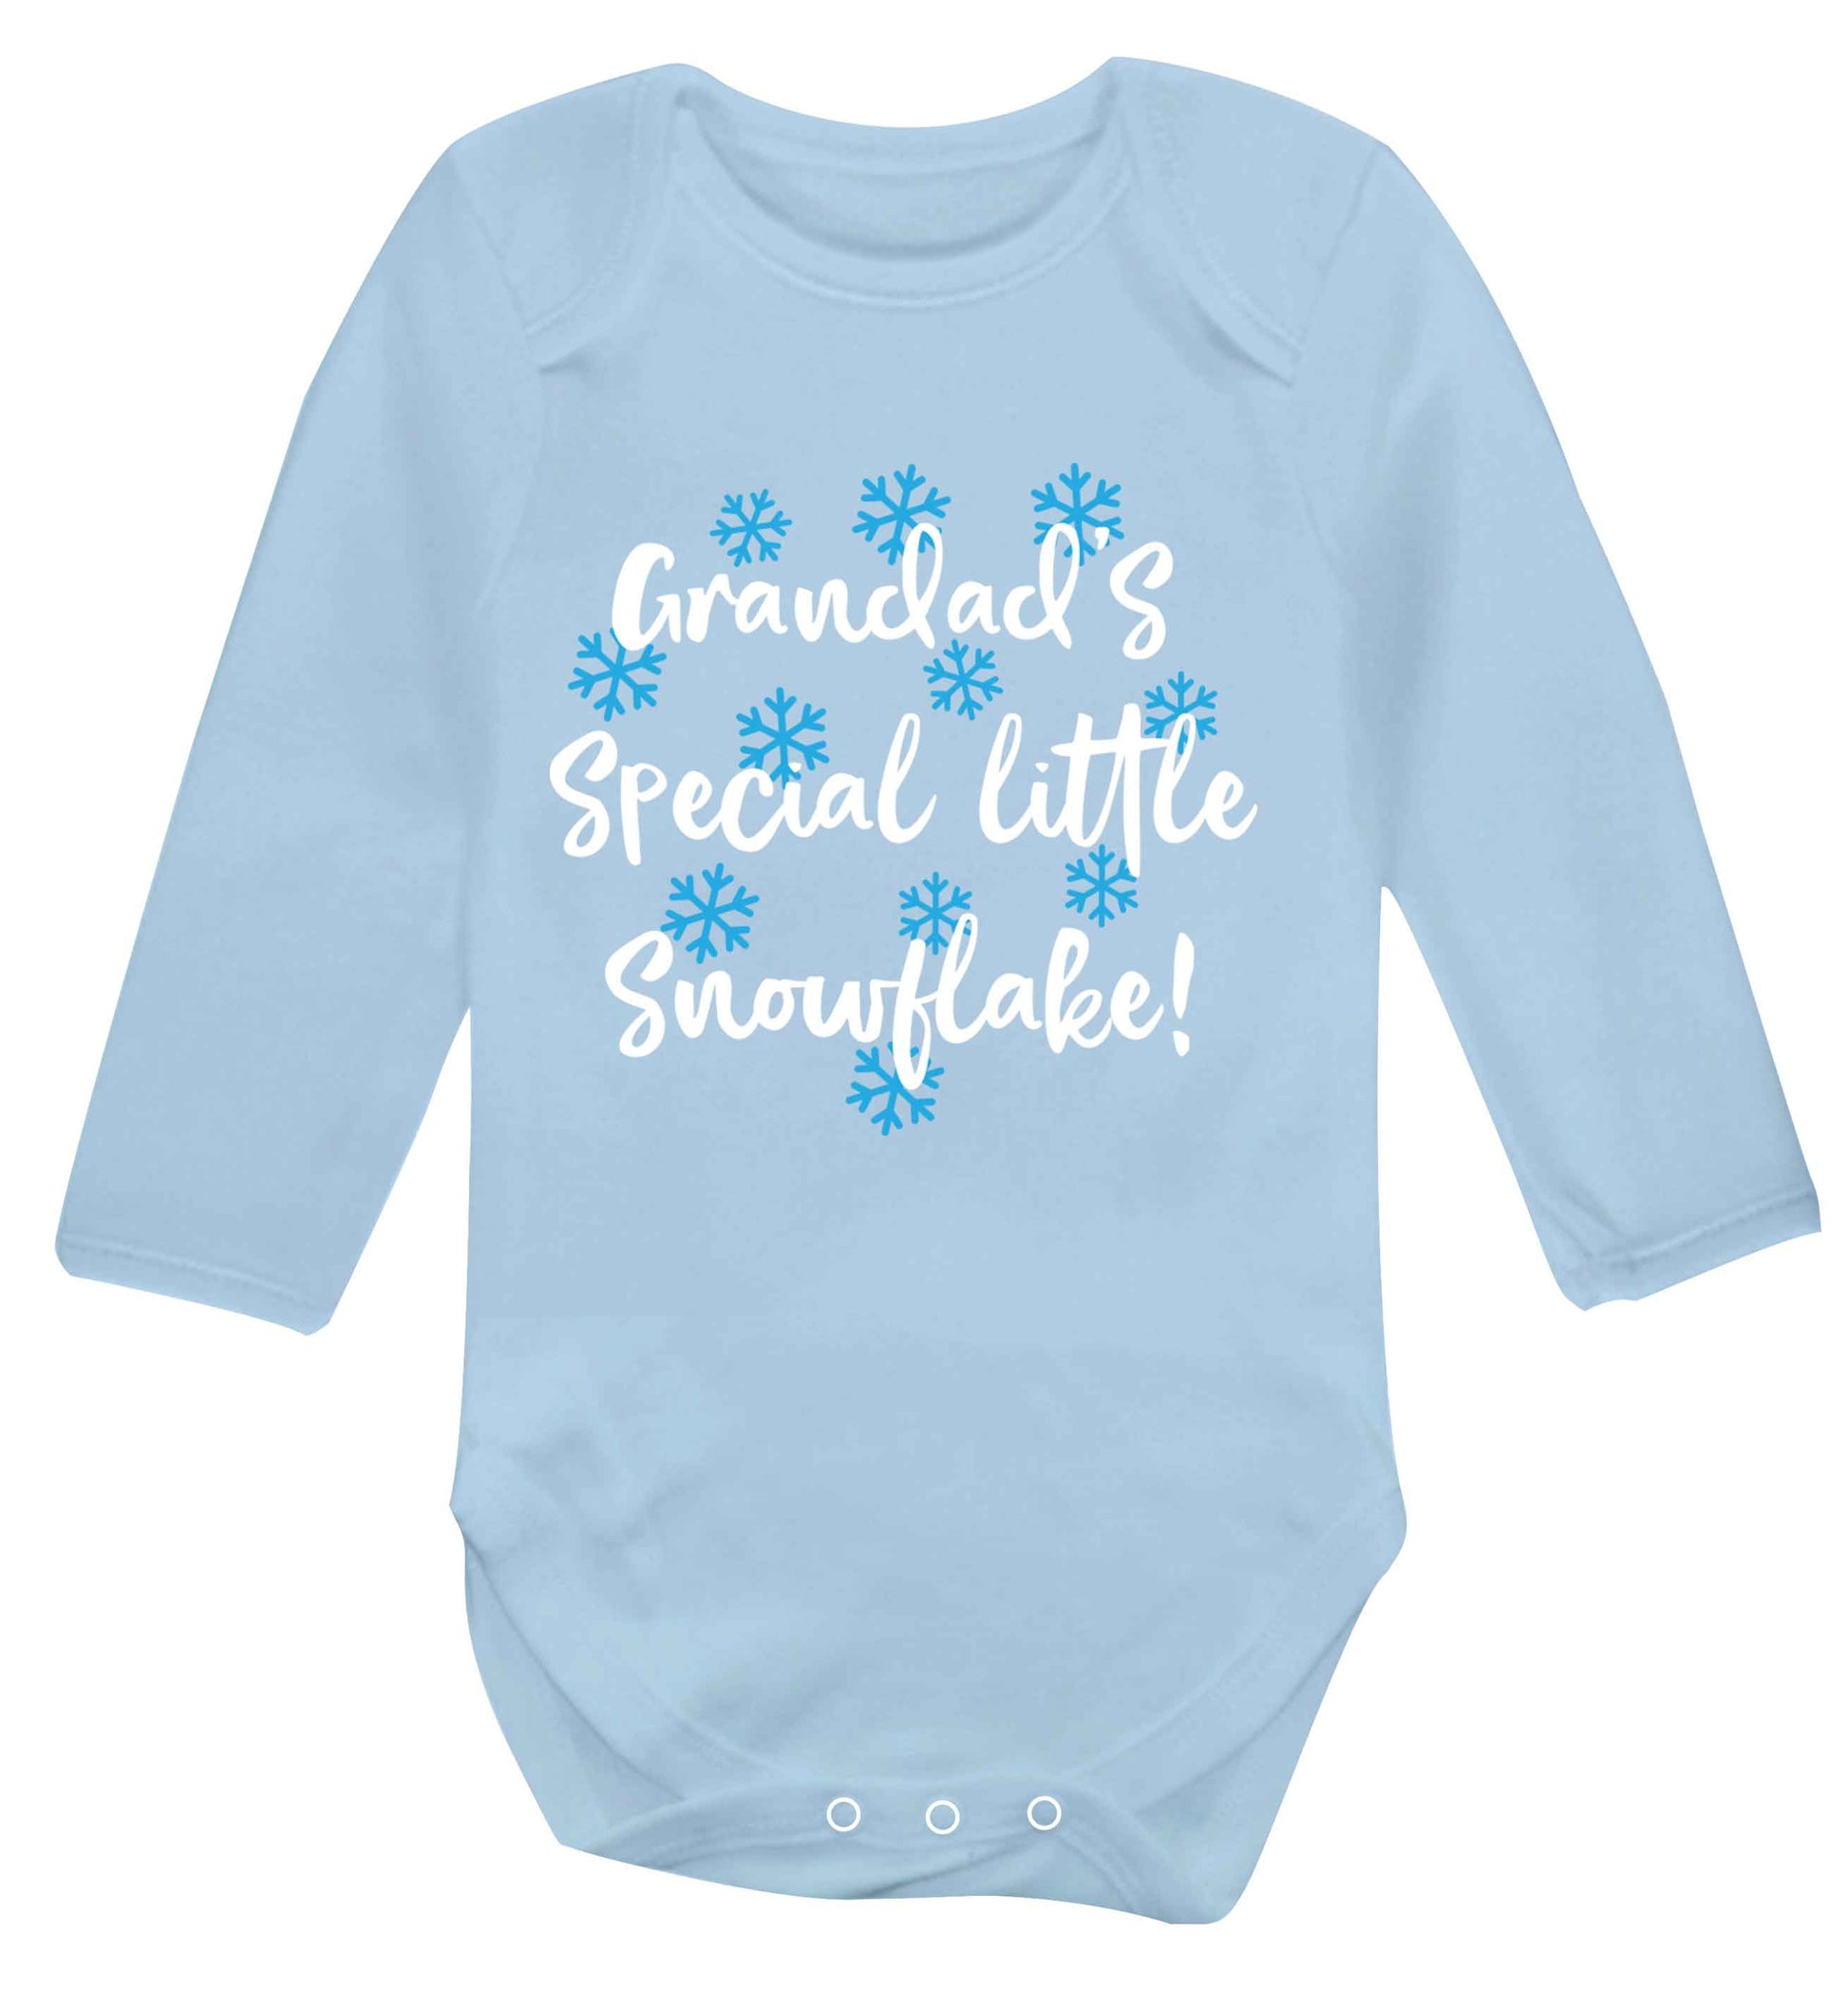 Grandad's special little snowflake Baby Vest long sleeved pale blue 6-12 months